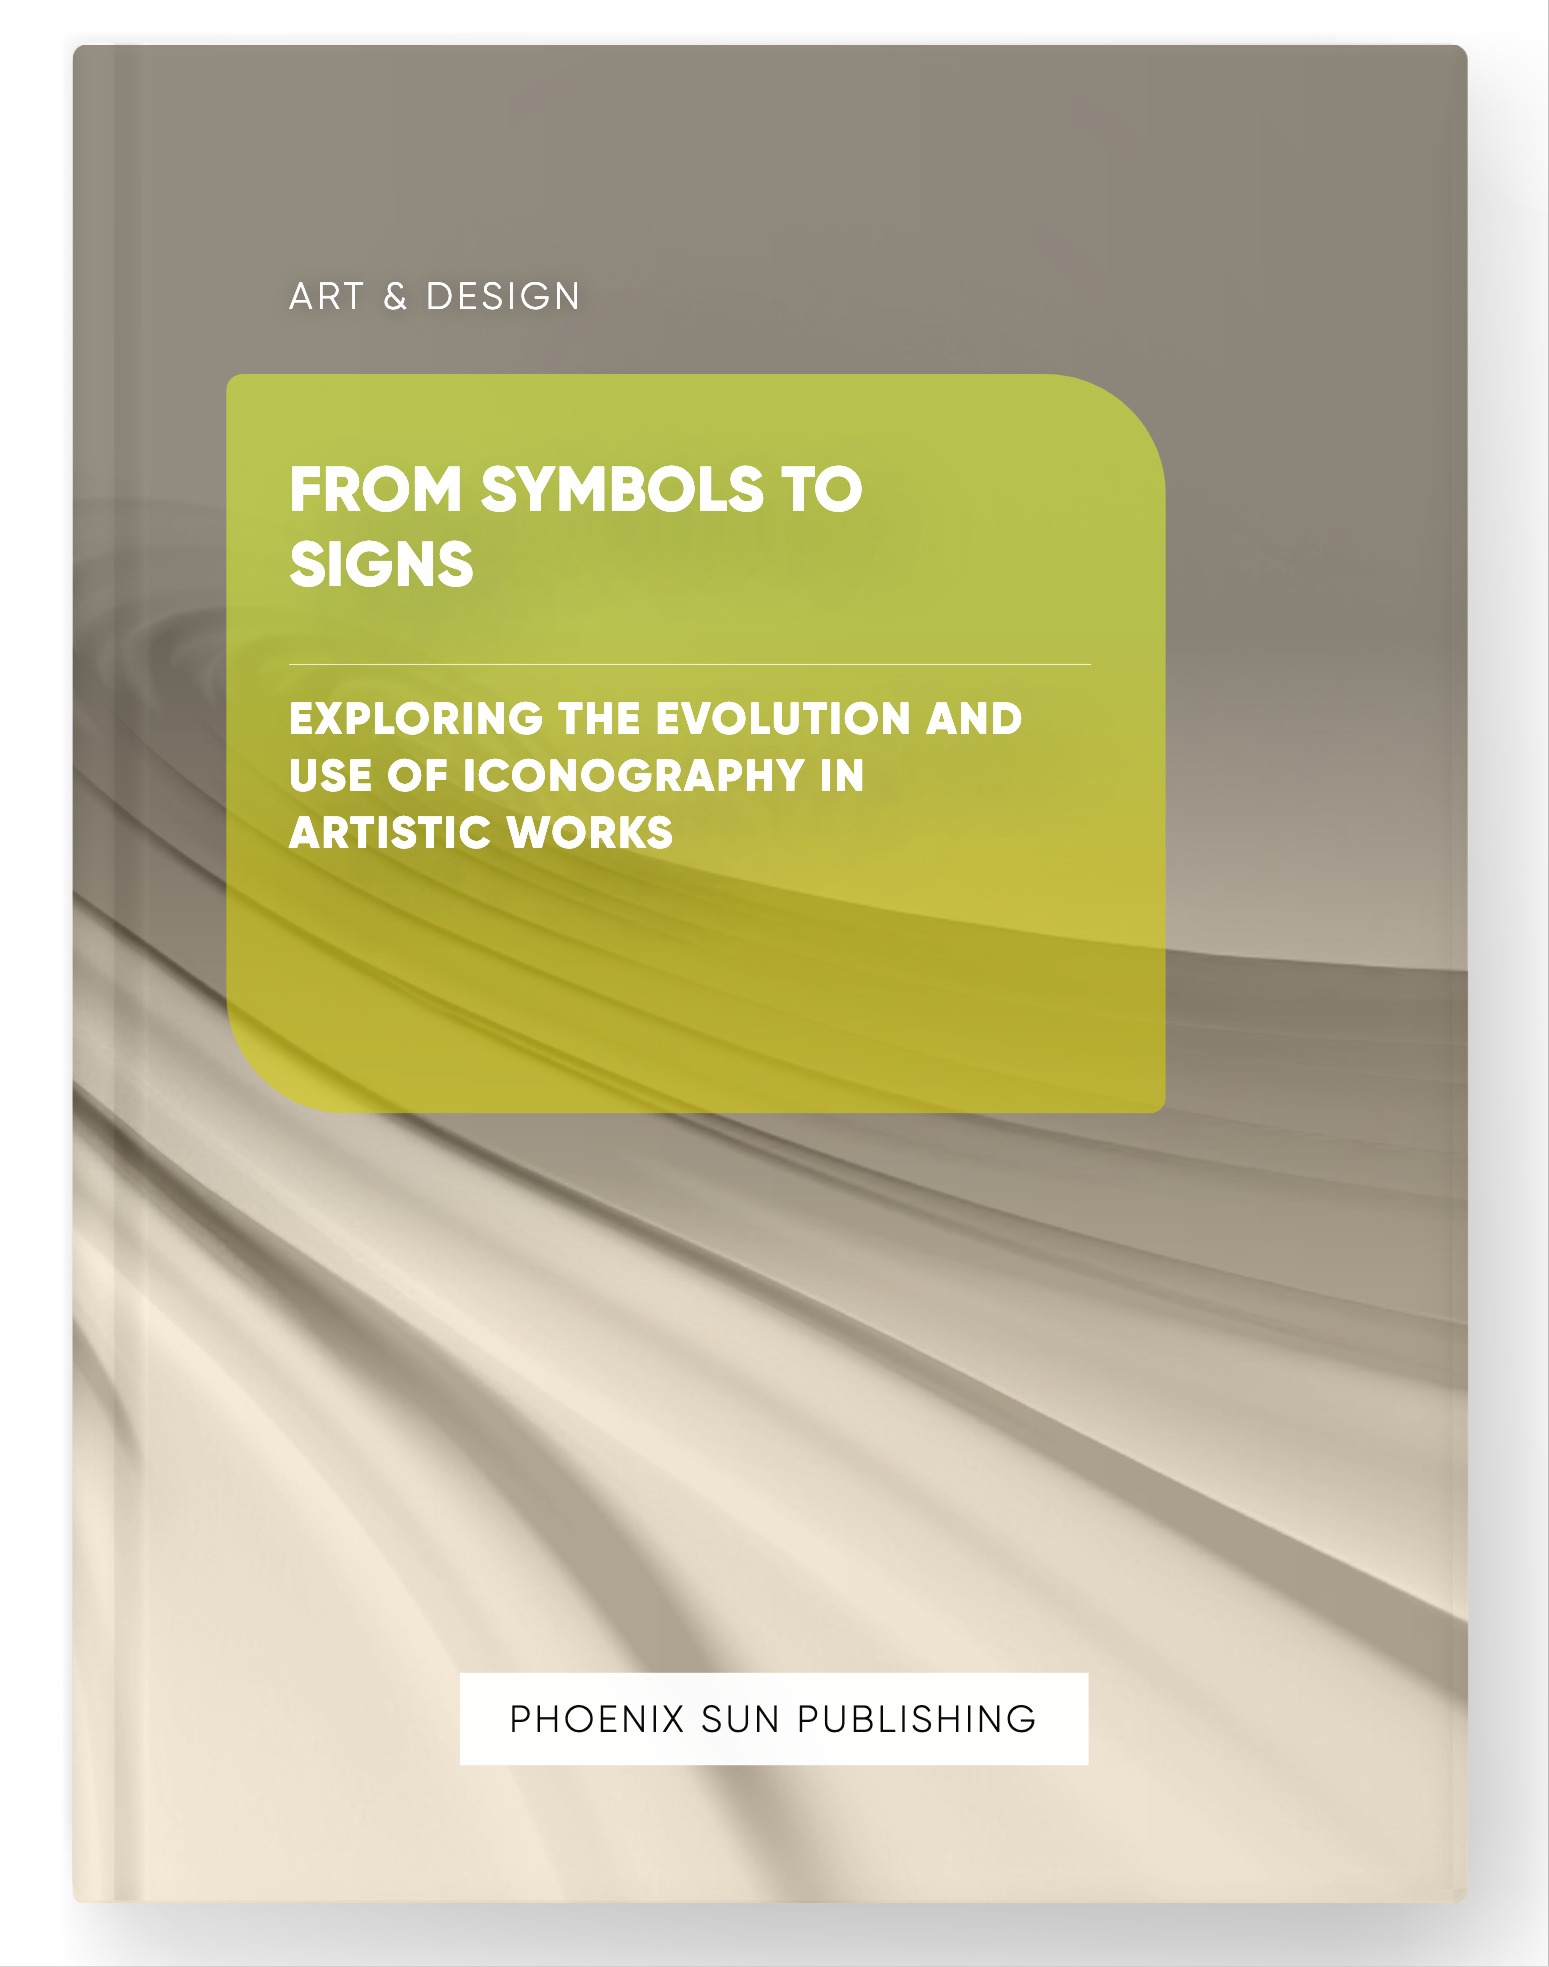 From Symbols to Signs – Exploring the Evolution and Use of Iconography in Artistic Works